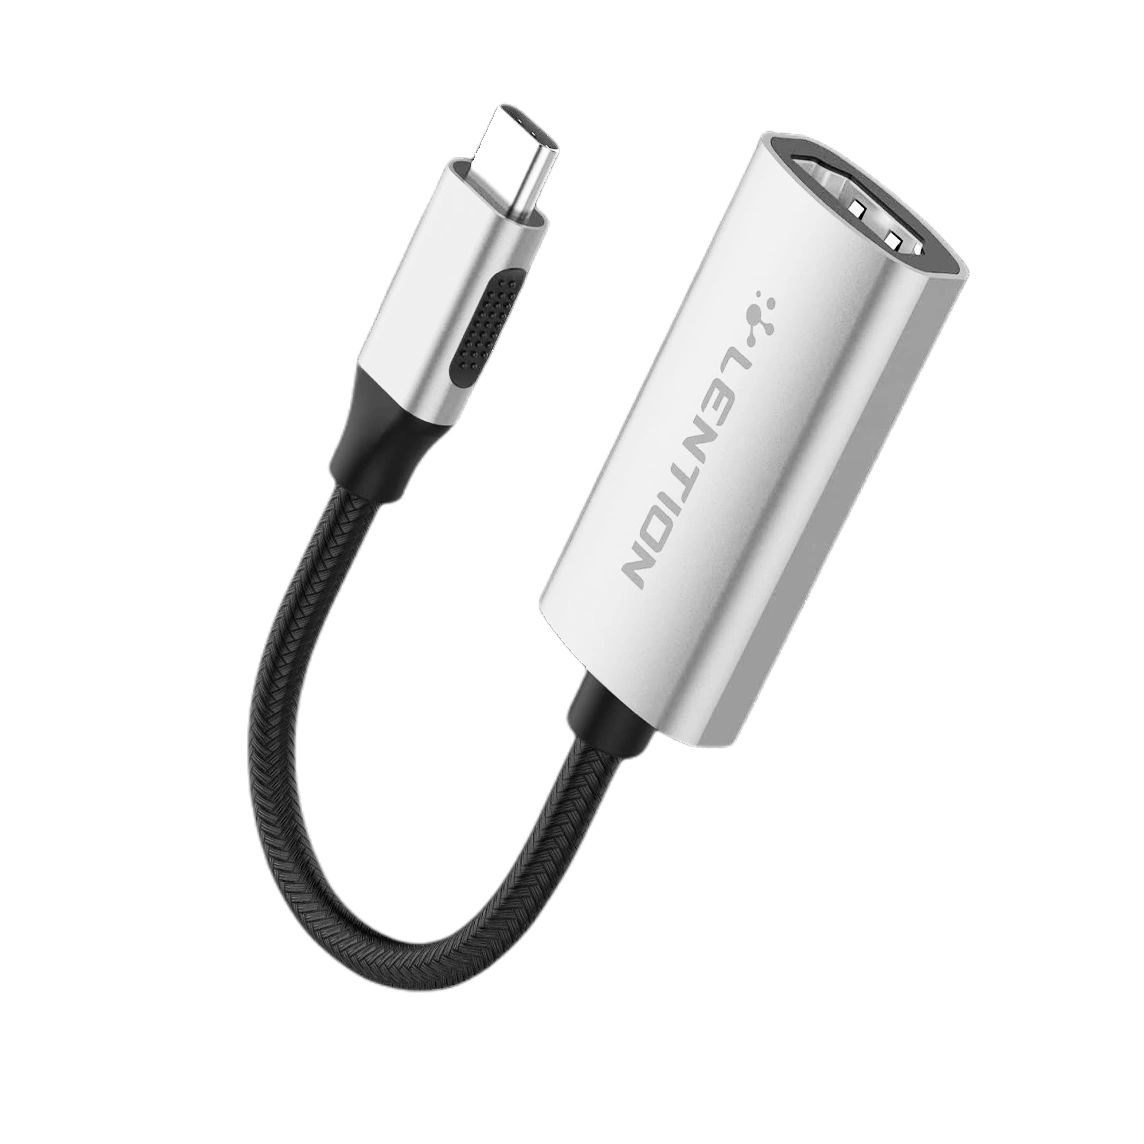 Lention USB-C to HDMI Adapter CU607